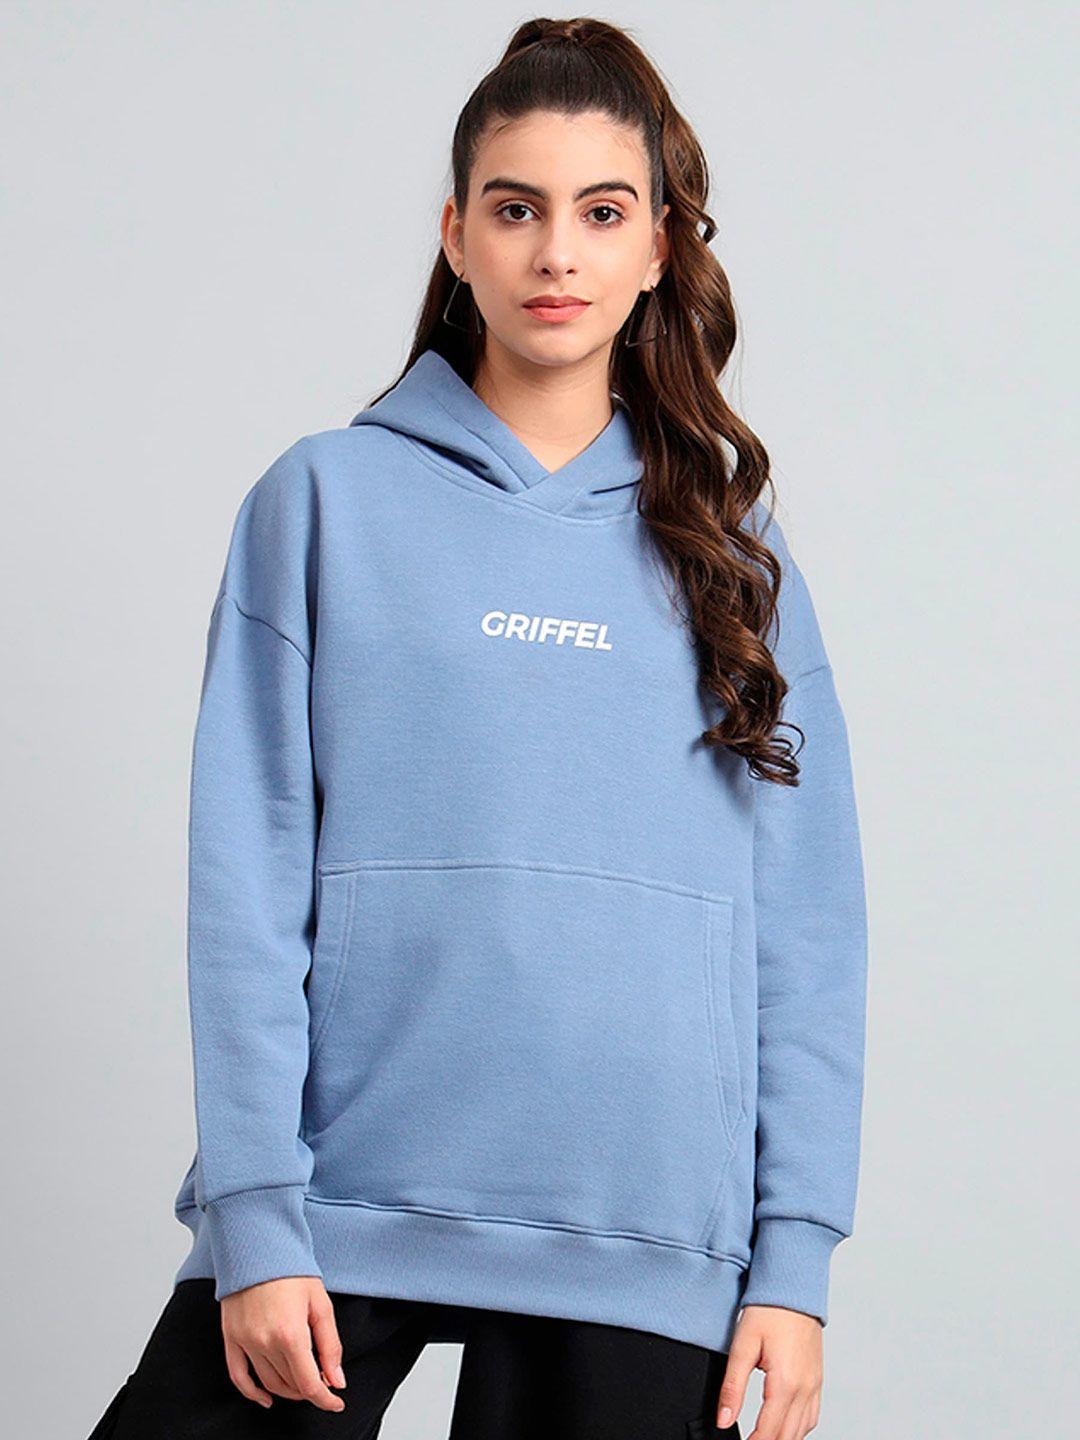 griffel-hooded-pullover